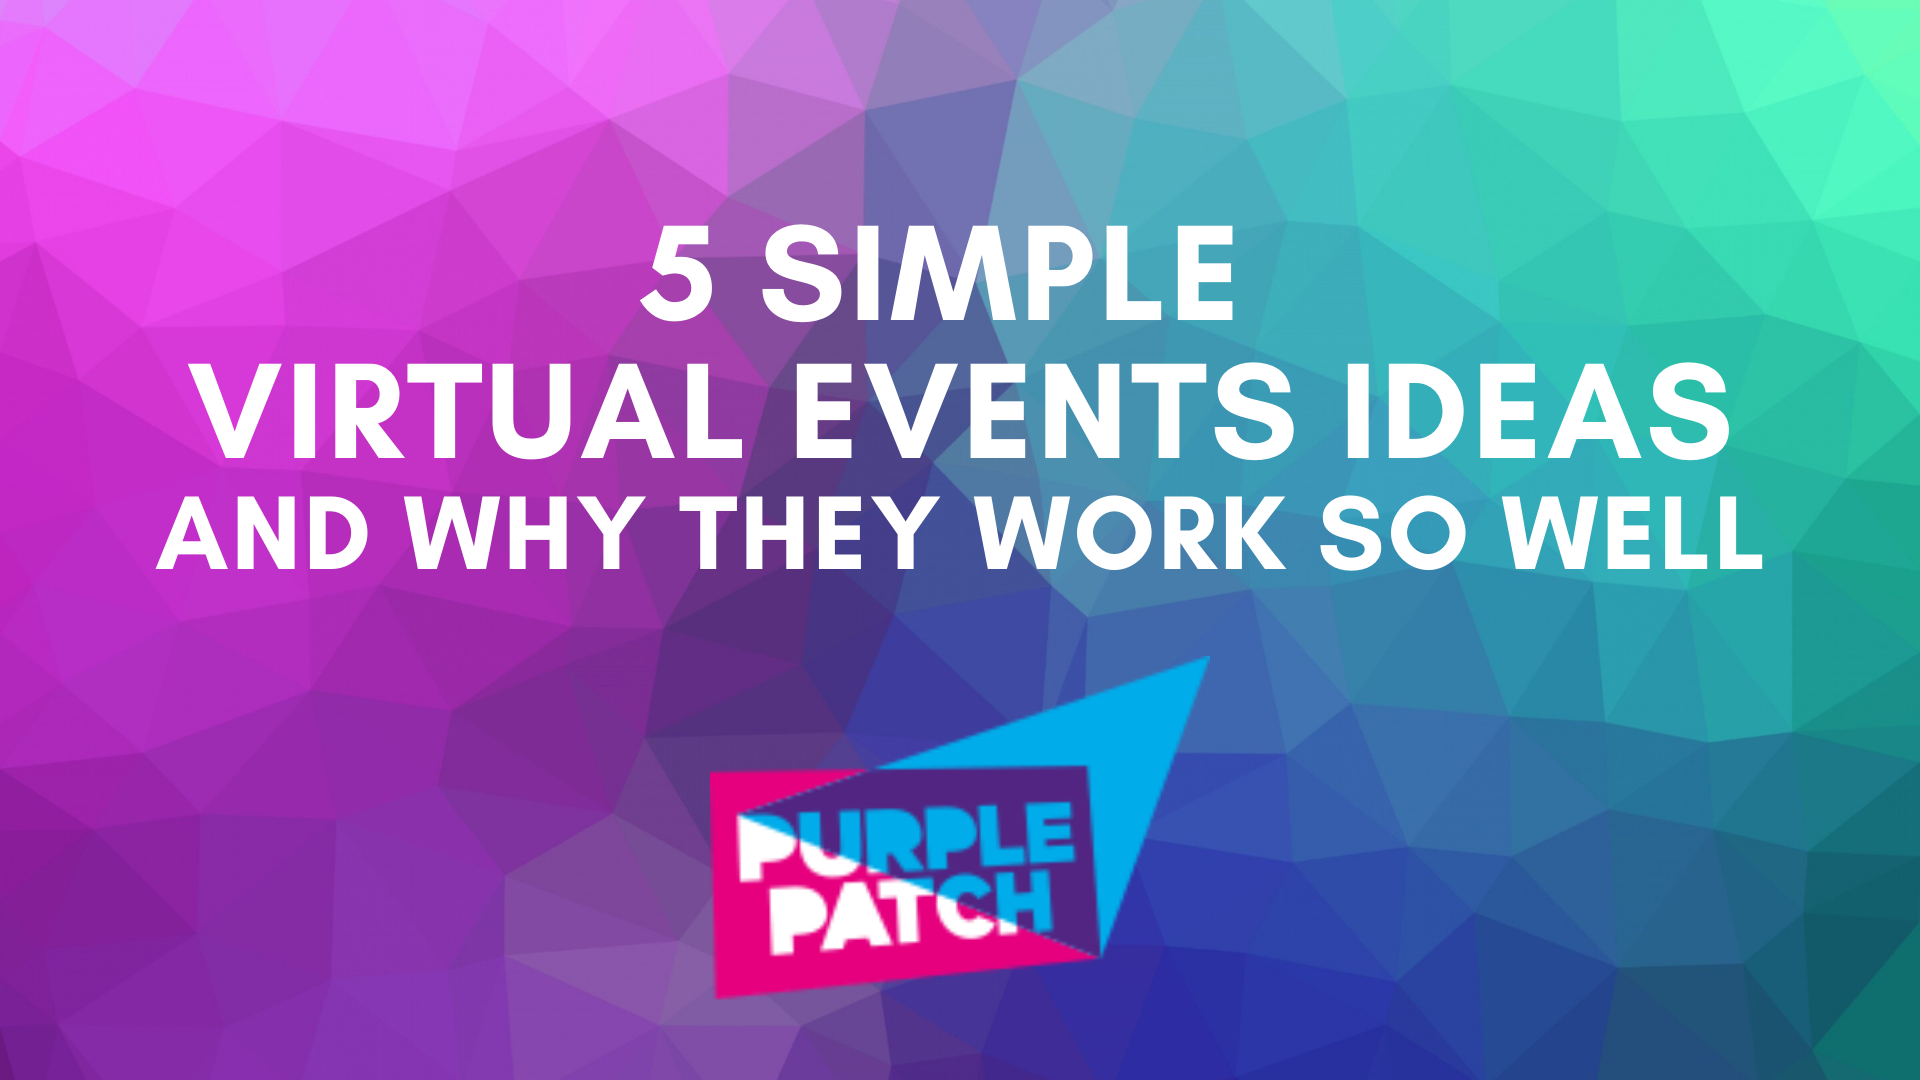 5 Simple Virtual Events Ideas and Why They Work So Well